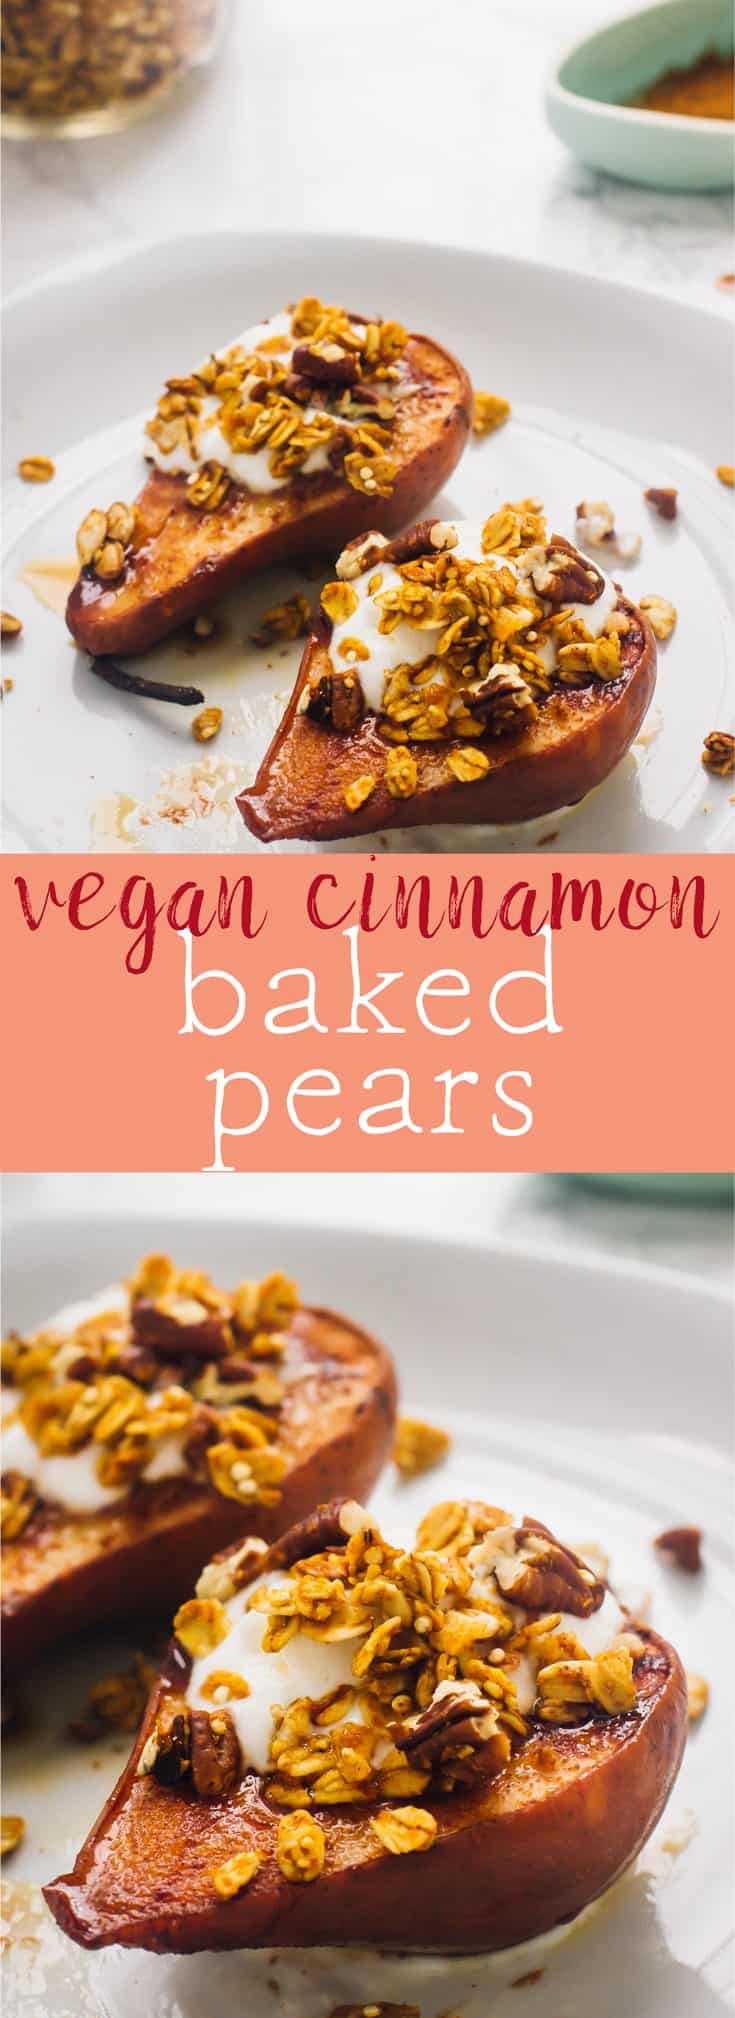 This Vegan Cinnamon Baked Pears are a real healthy fall treat! Just three ingredients, so soft they taste caramelised and so easy to make!